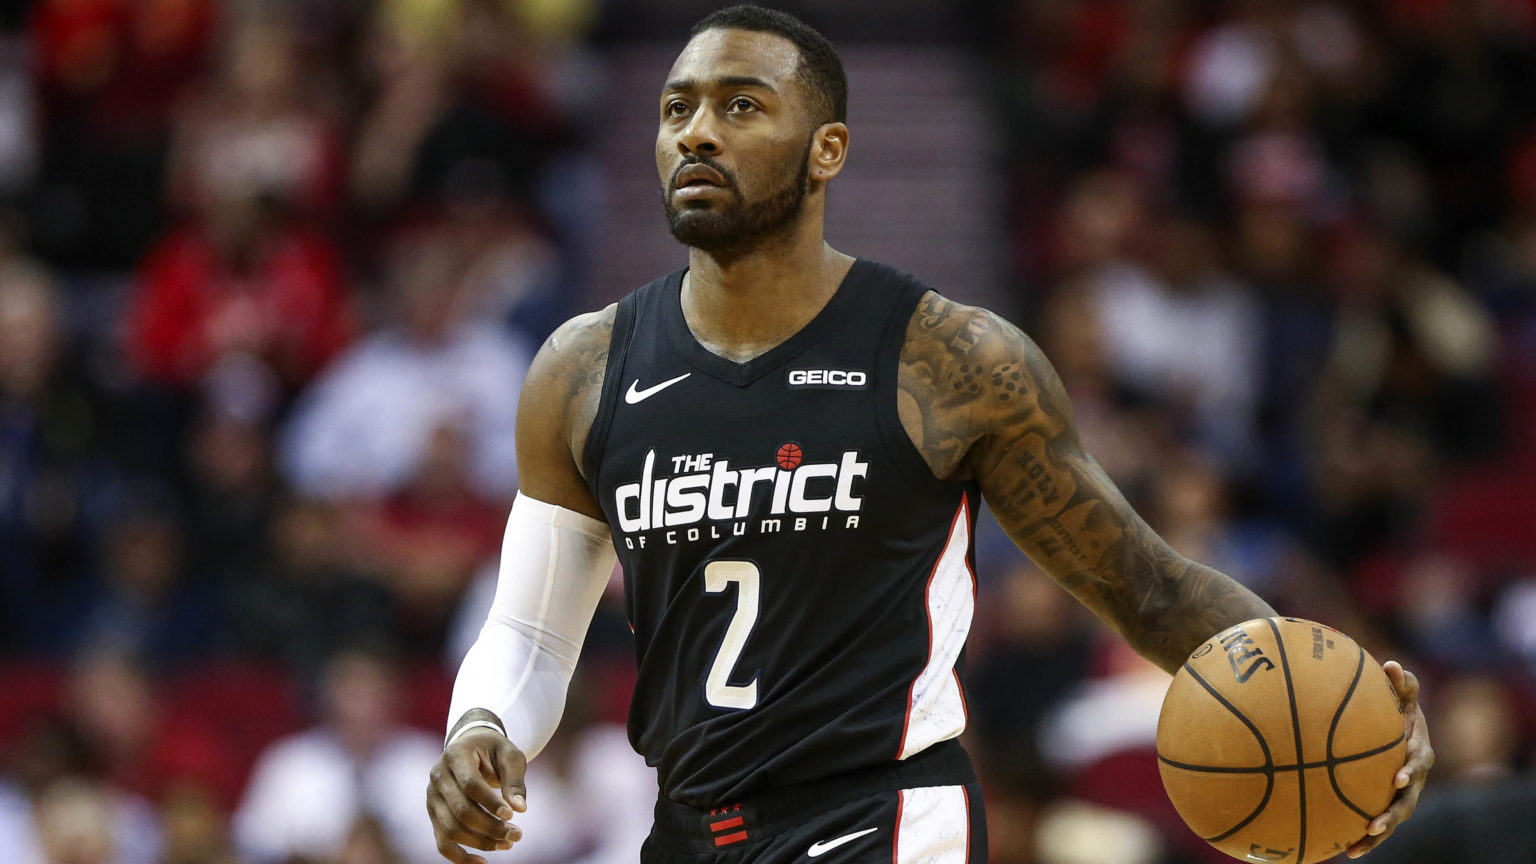 John Wall Says Hes Going To Return From Injury Better Than Before